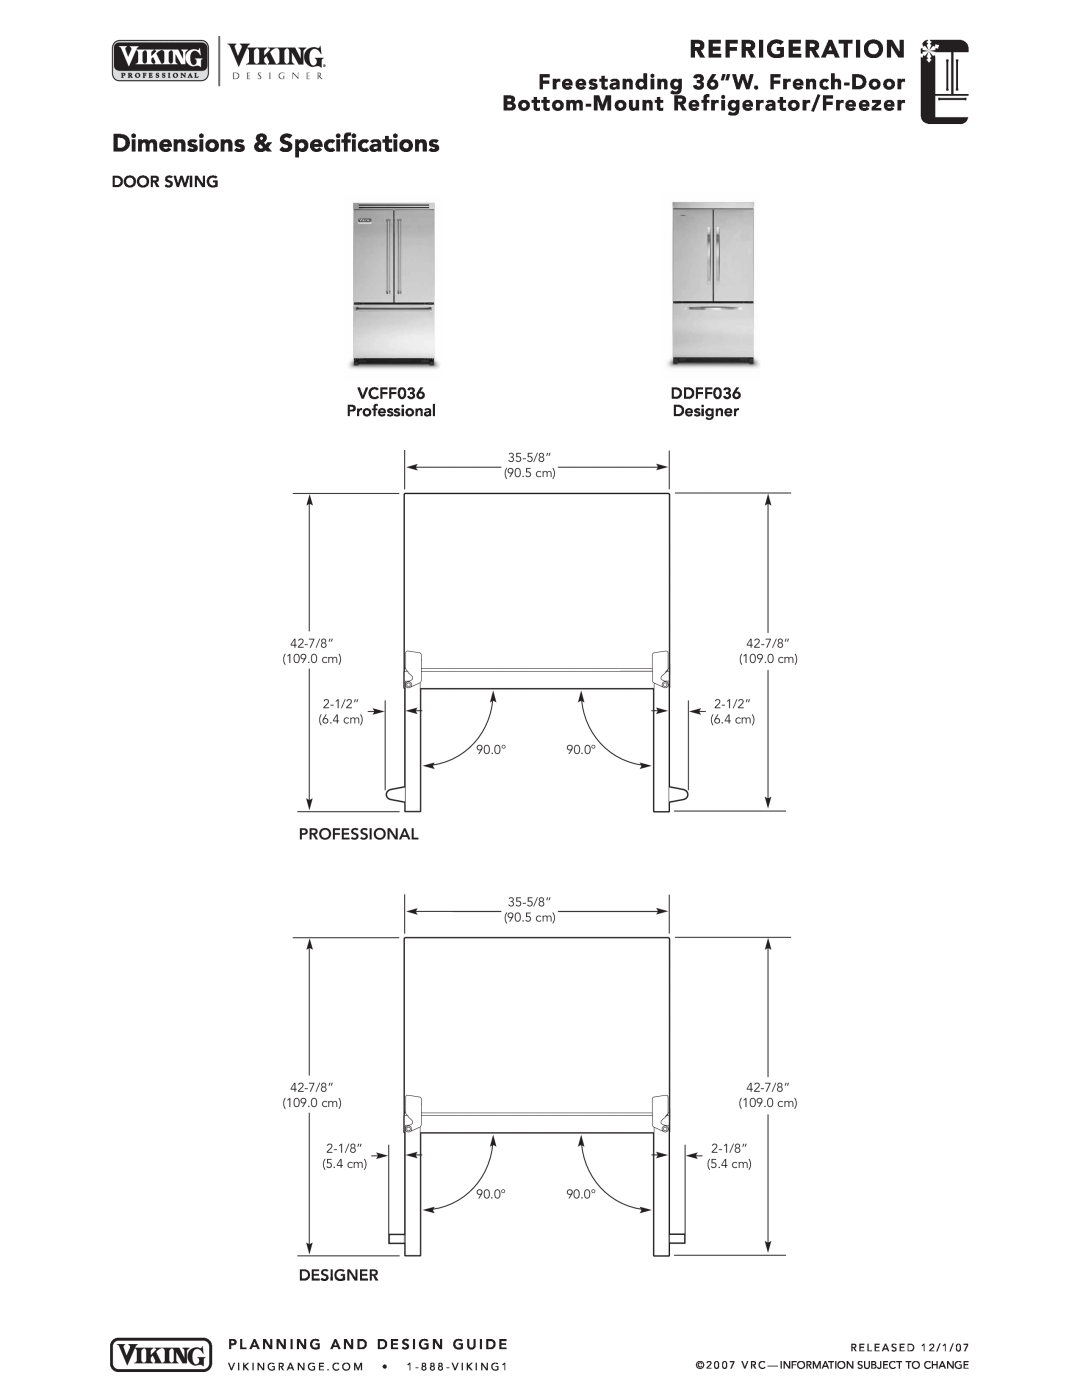 Viking VCFF Refrigeration, Dimensions & Specifications, Freestanding 36”W. French-Door Bottom-Mount Refrigerator/Freezer 